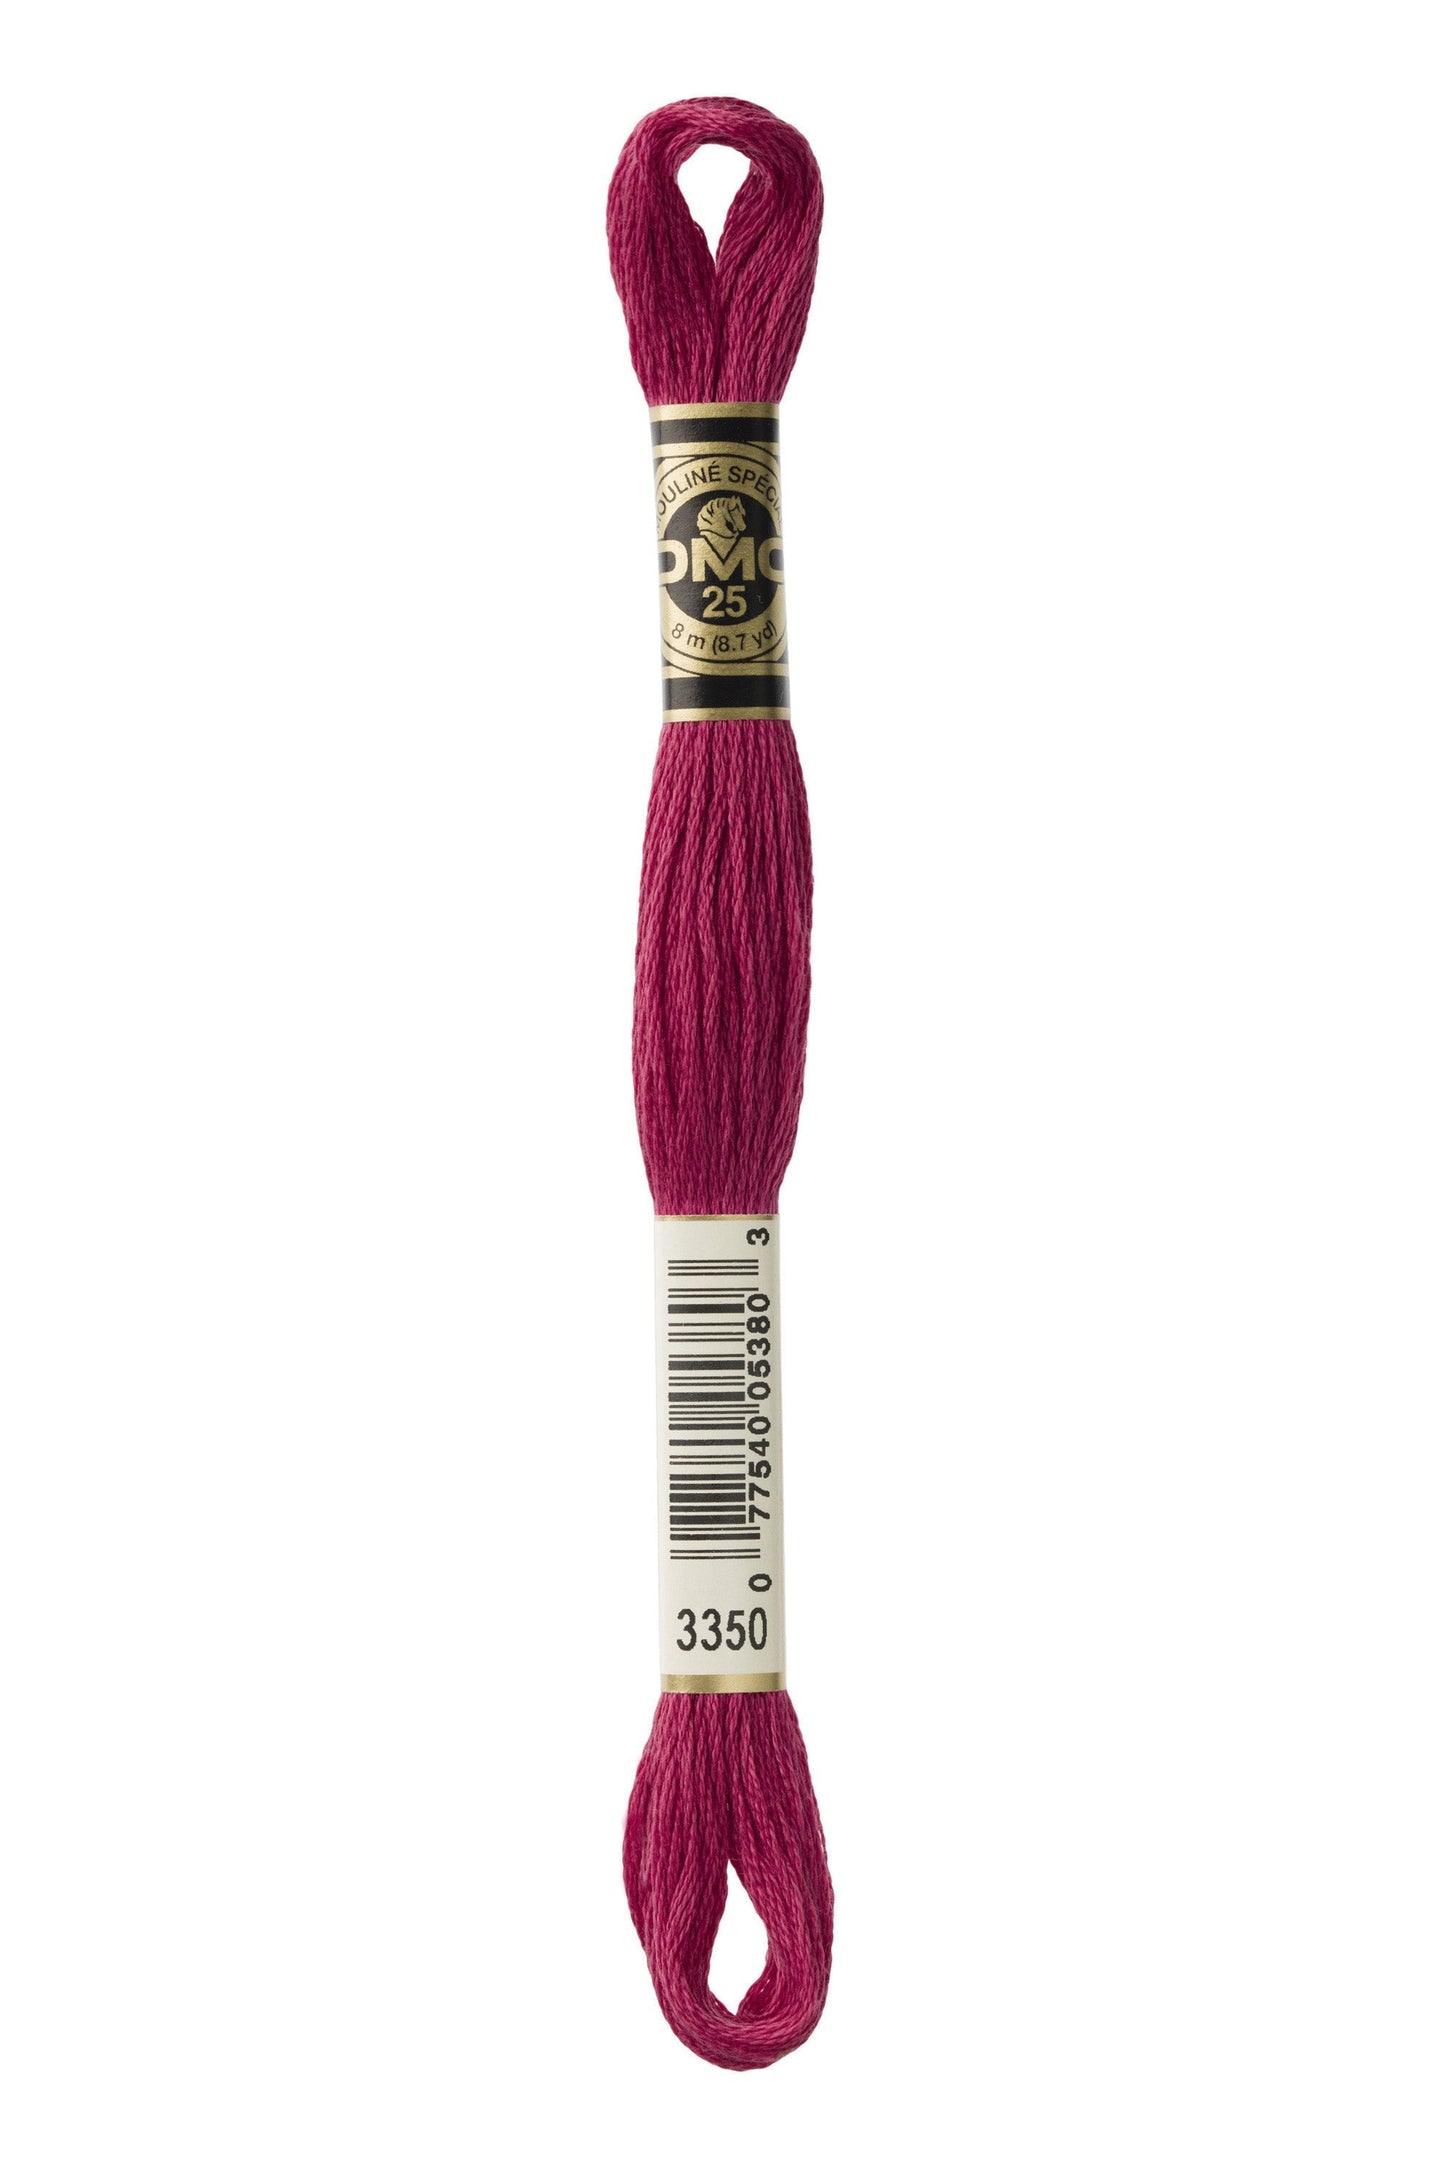 Six-Strand Embroidery Floss - 3350 (Dragonfruit)-Embroidery Thread-Wild and Woolly Yarns